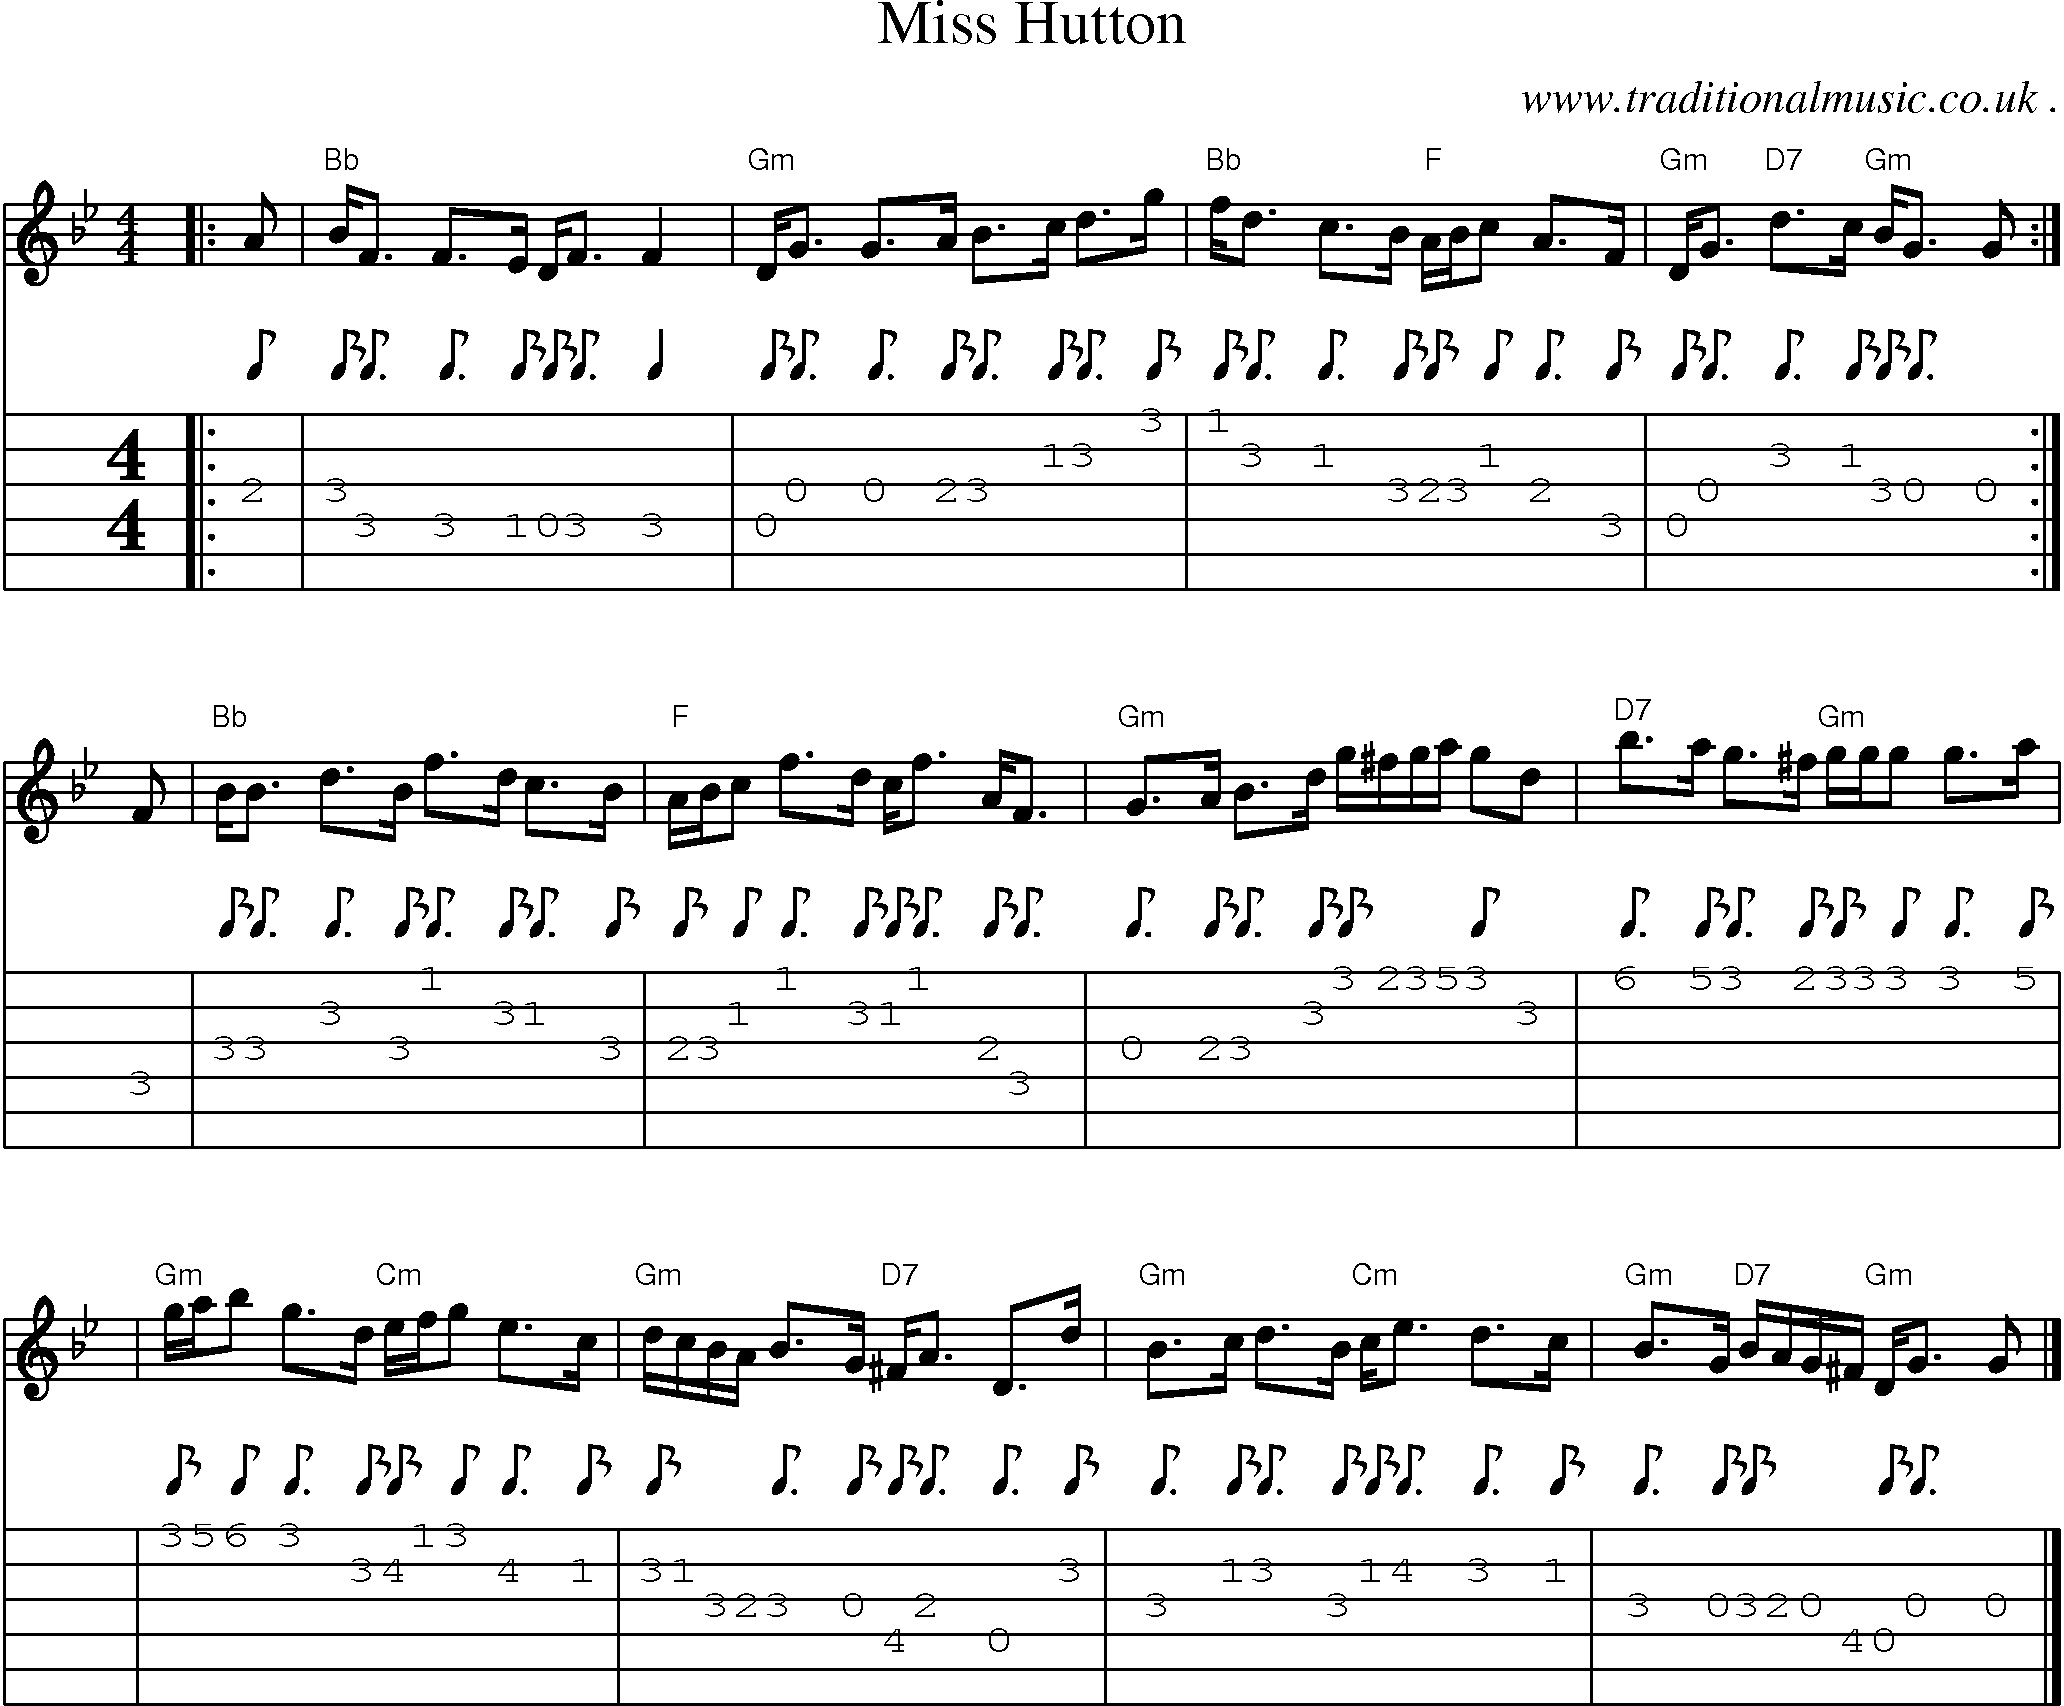 Sheet-music  score, Chords and Guitar Tabs for Miss Hutton